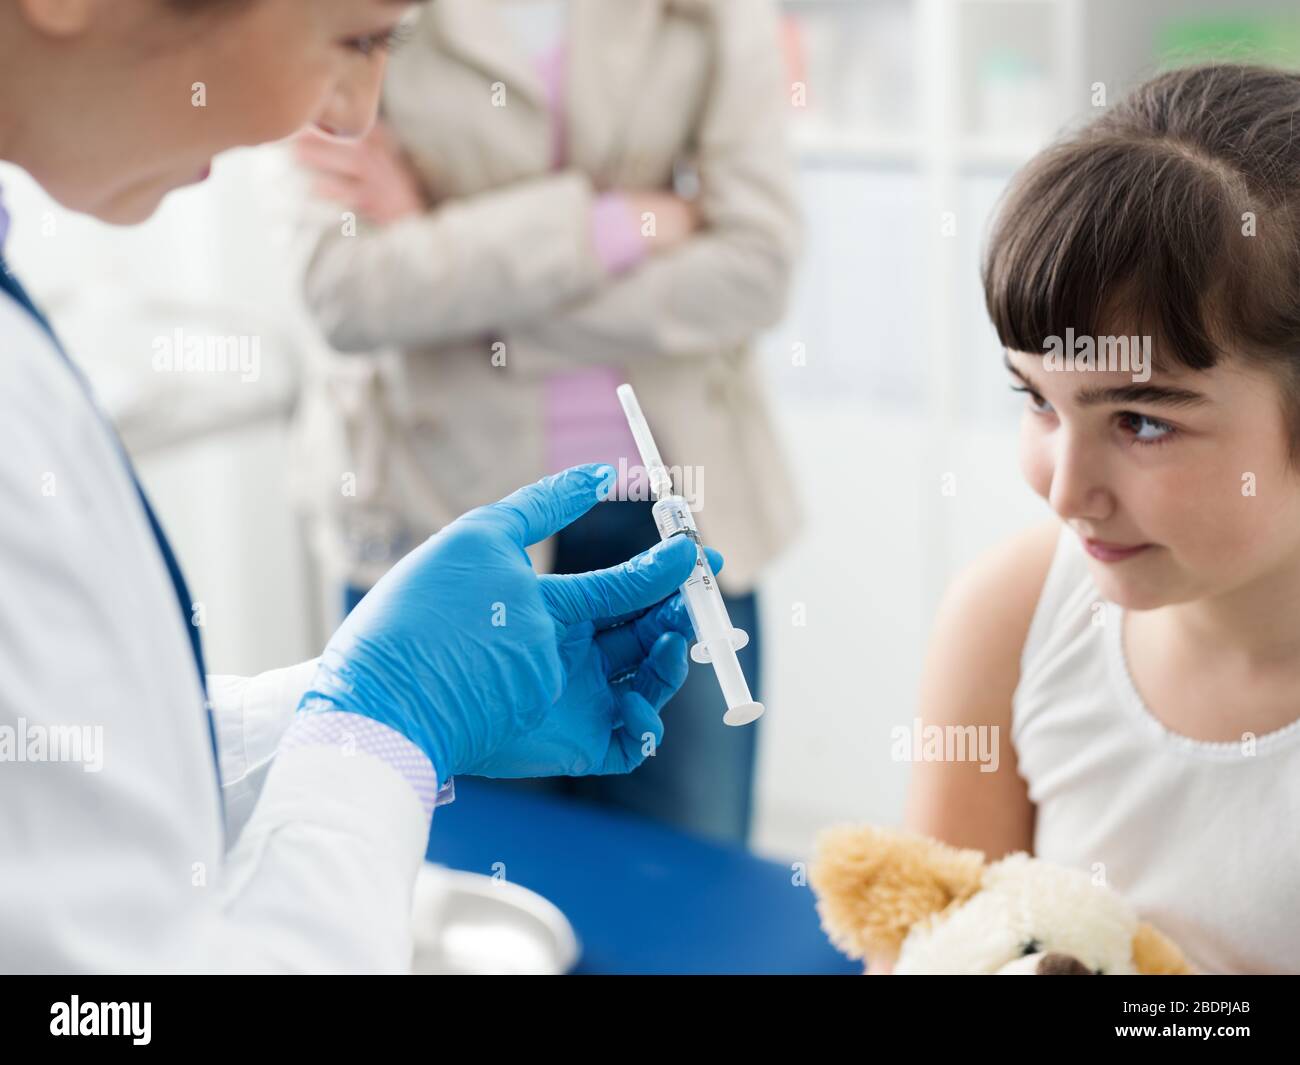 Friendly female doctor showing the syringe to a girl before giving the injection, the girl is relaxed and smiling Stock Photo